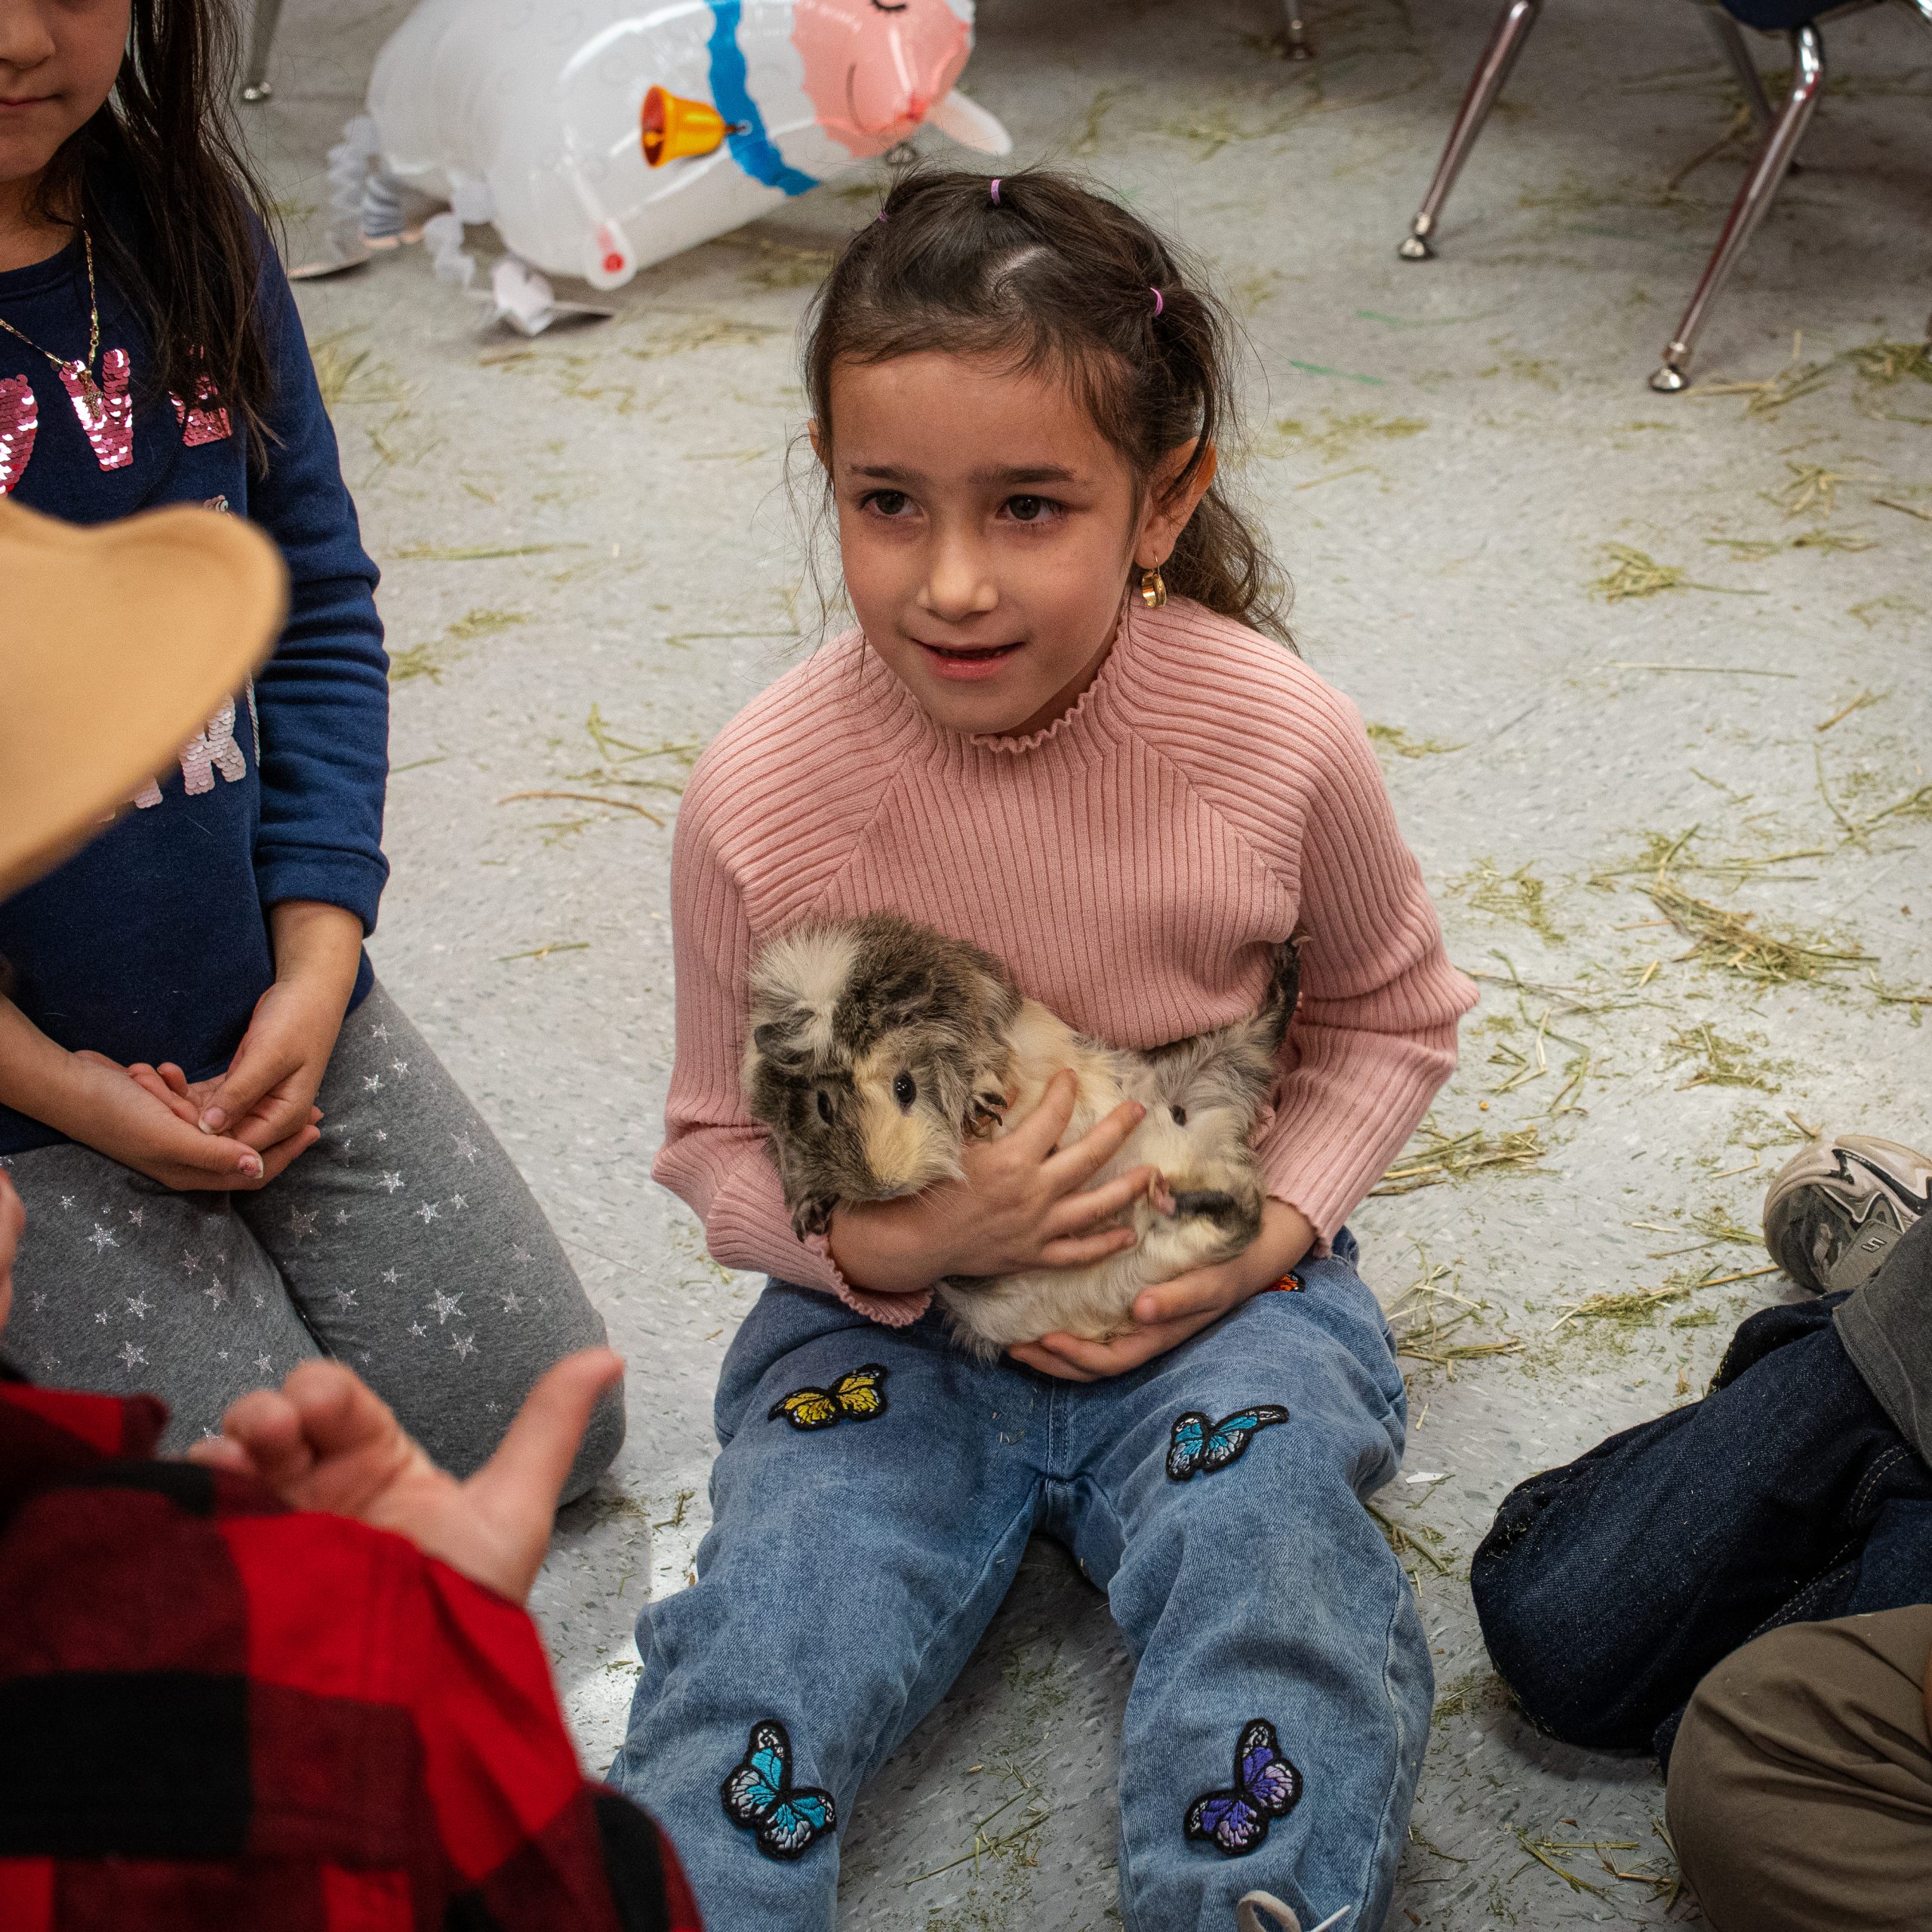 A student is seen holding an animal and smiling